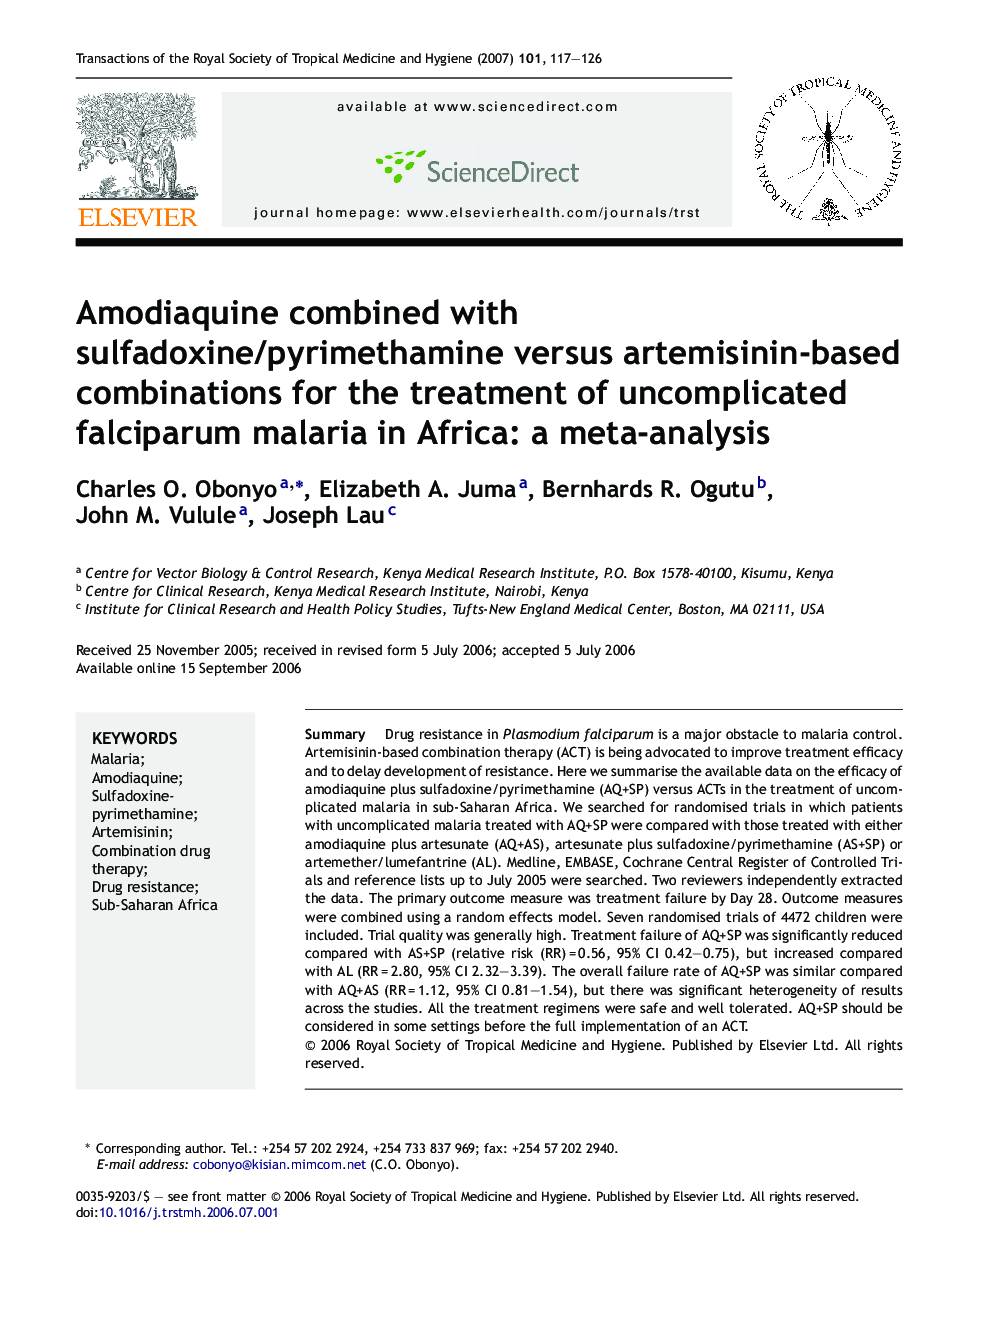 Amodiaquine combined with sulfadoxine/pyrimethamine versus artemisinin-based combinations for the treatment of uncomplicated falciparum malaria in Africa: a meta-analysis